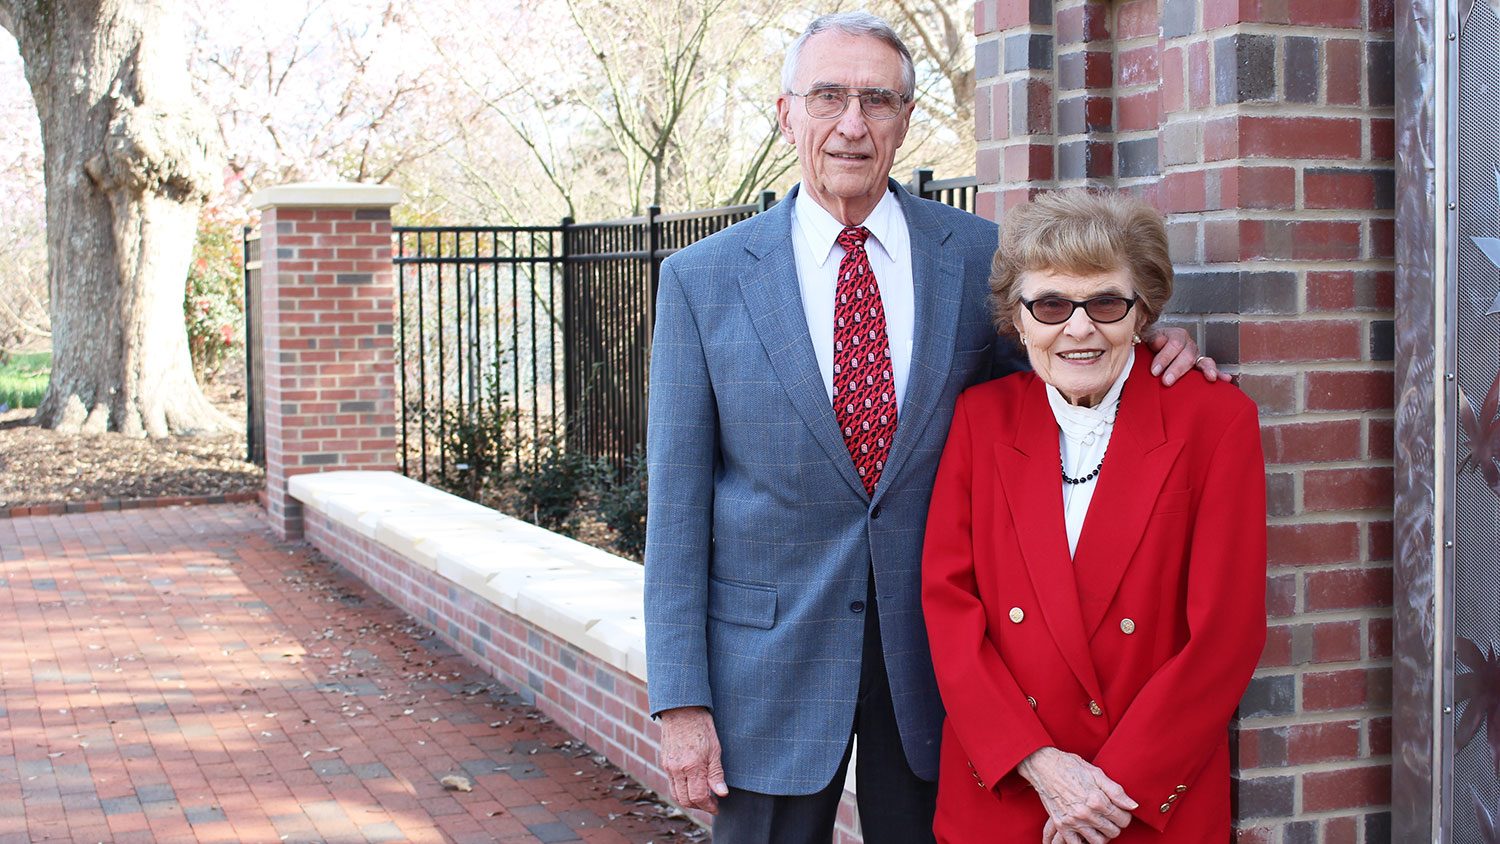 Drs. Charles and Marilyn Stuber